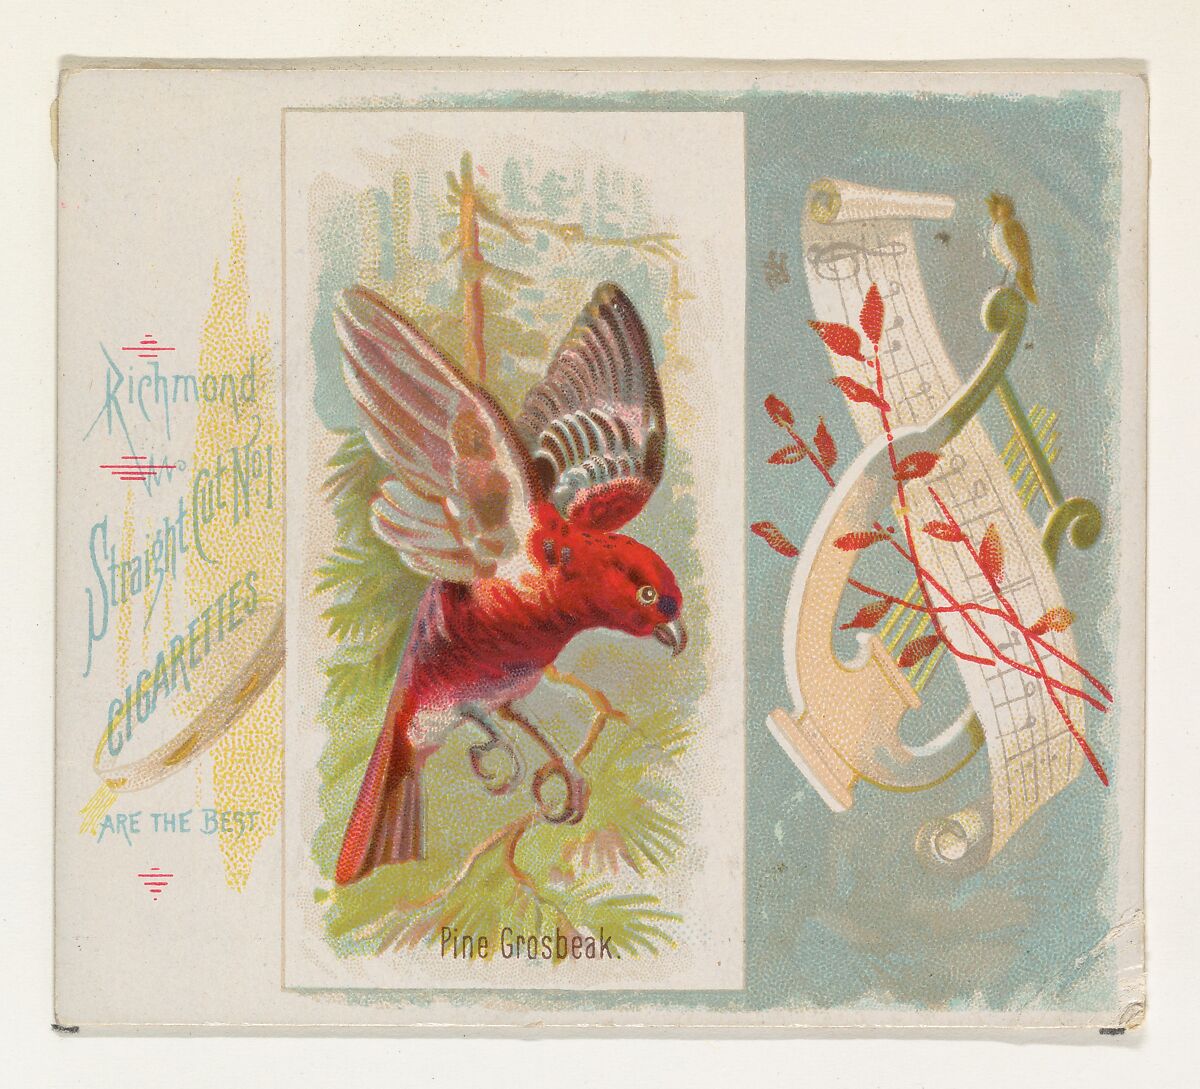 Pine Grosbeak, from the Song Birds of the World series (N42) for Allen & Ginter Cigarettes, Issued by Allen &amp; Ginter (American, Richmond, Virginia), Commercial color lithograph 